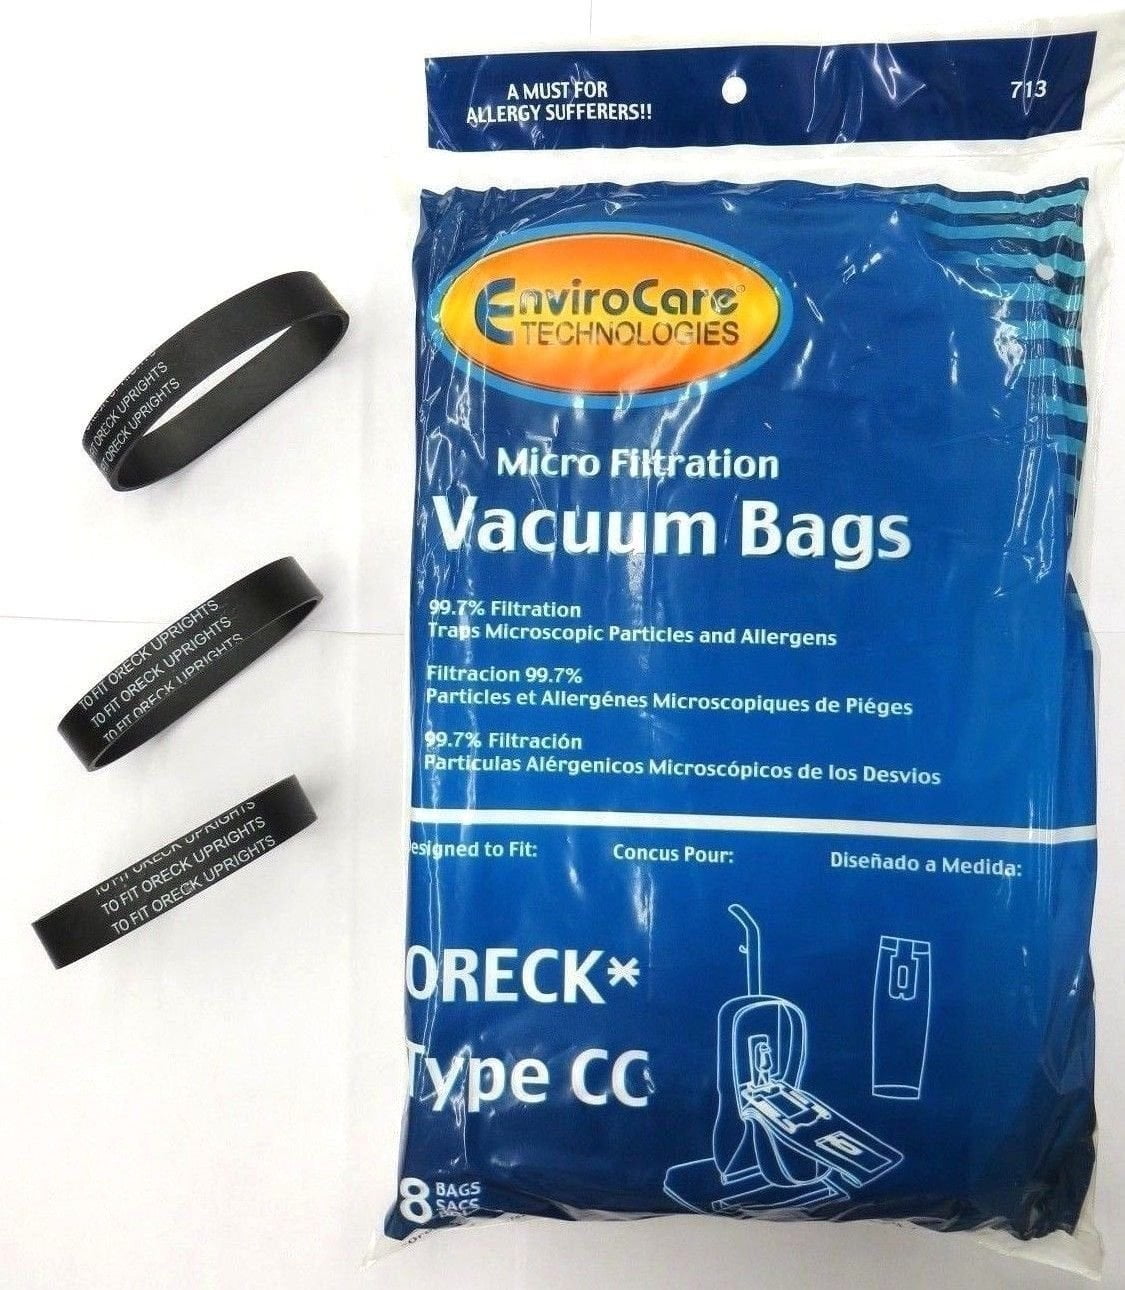 X-L EnviroCare Oreck Vacuum Cleaner Bags to Fit Style Cc and All Upright Models 